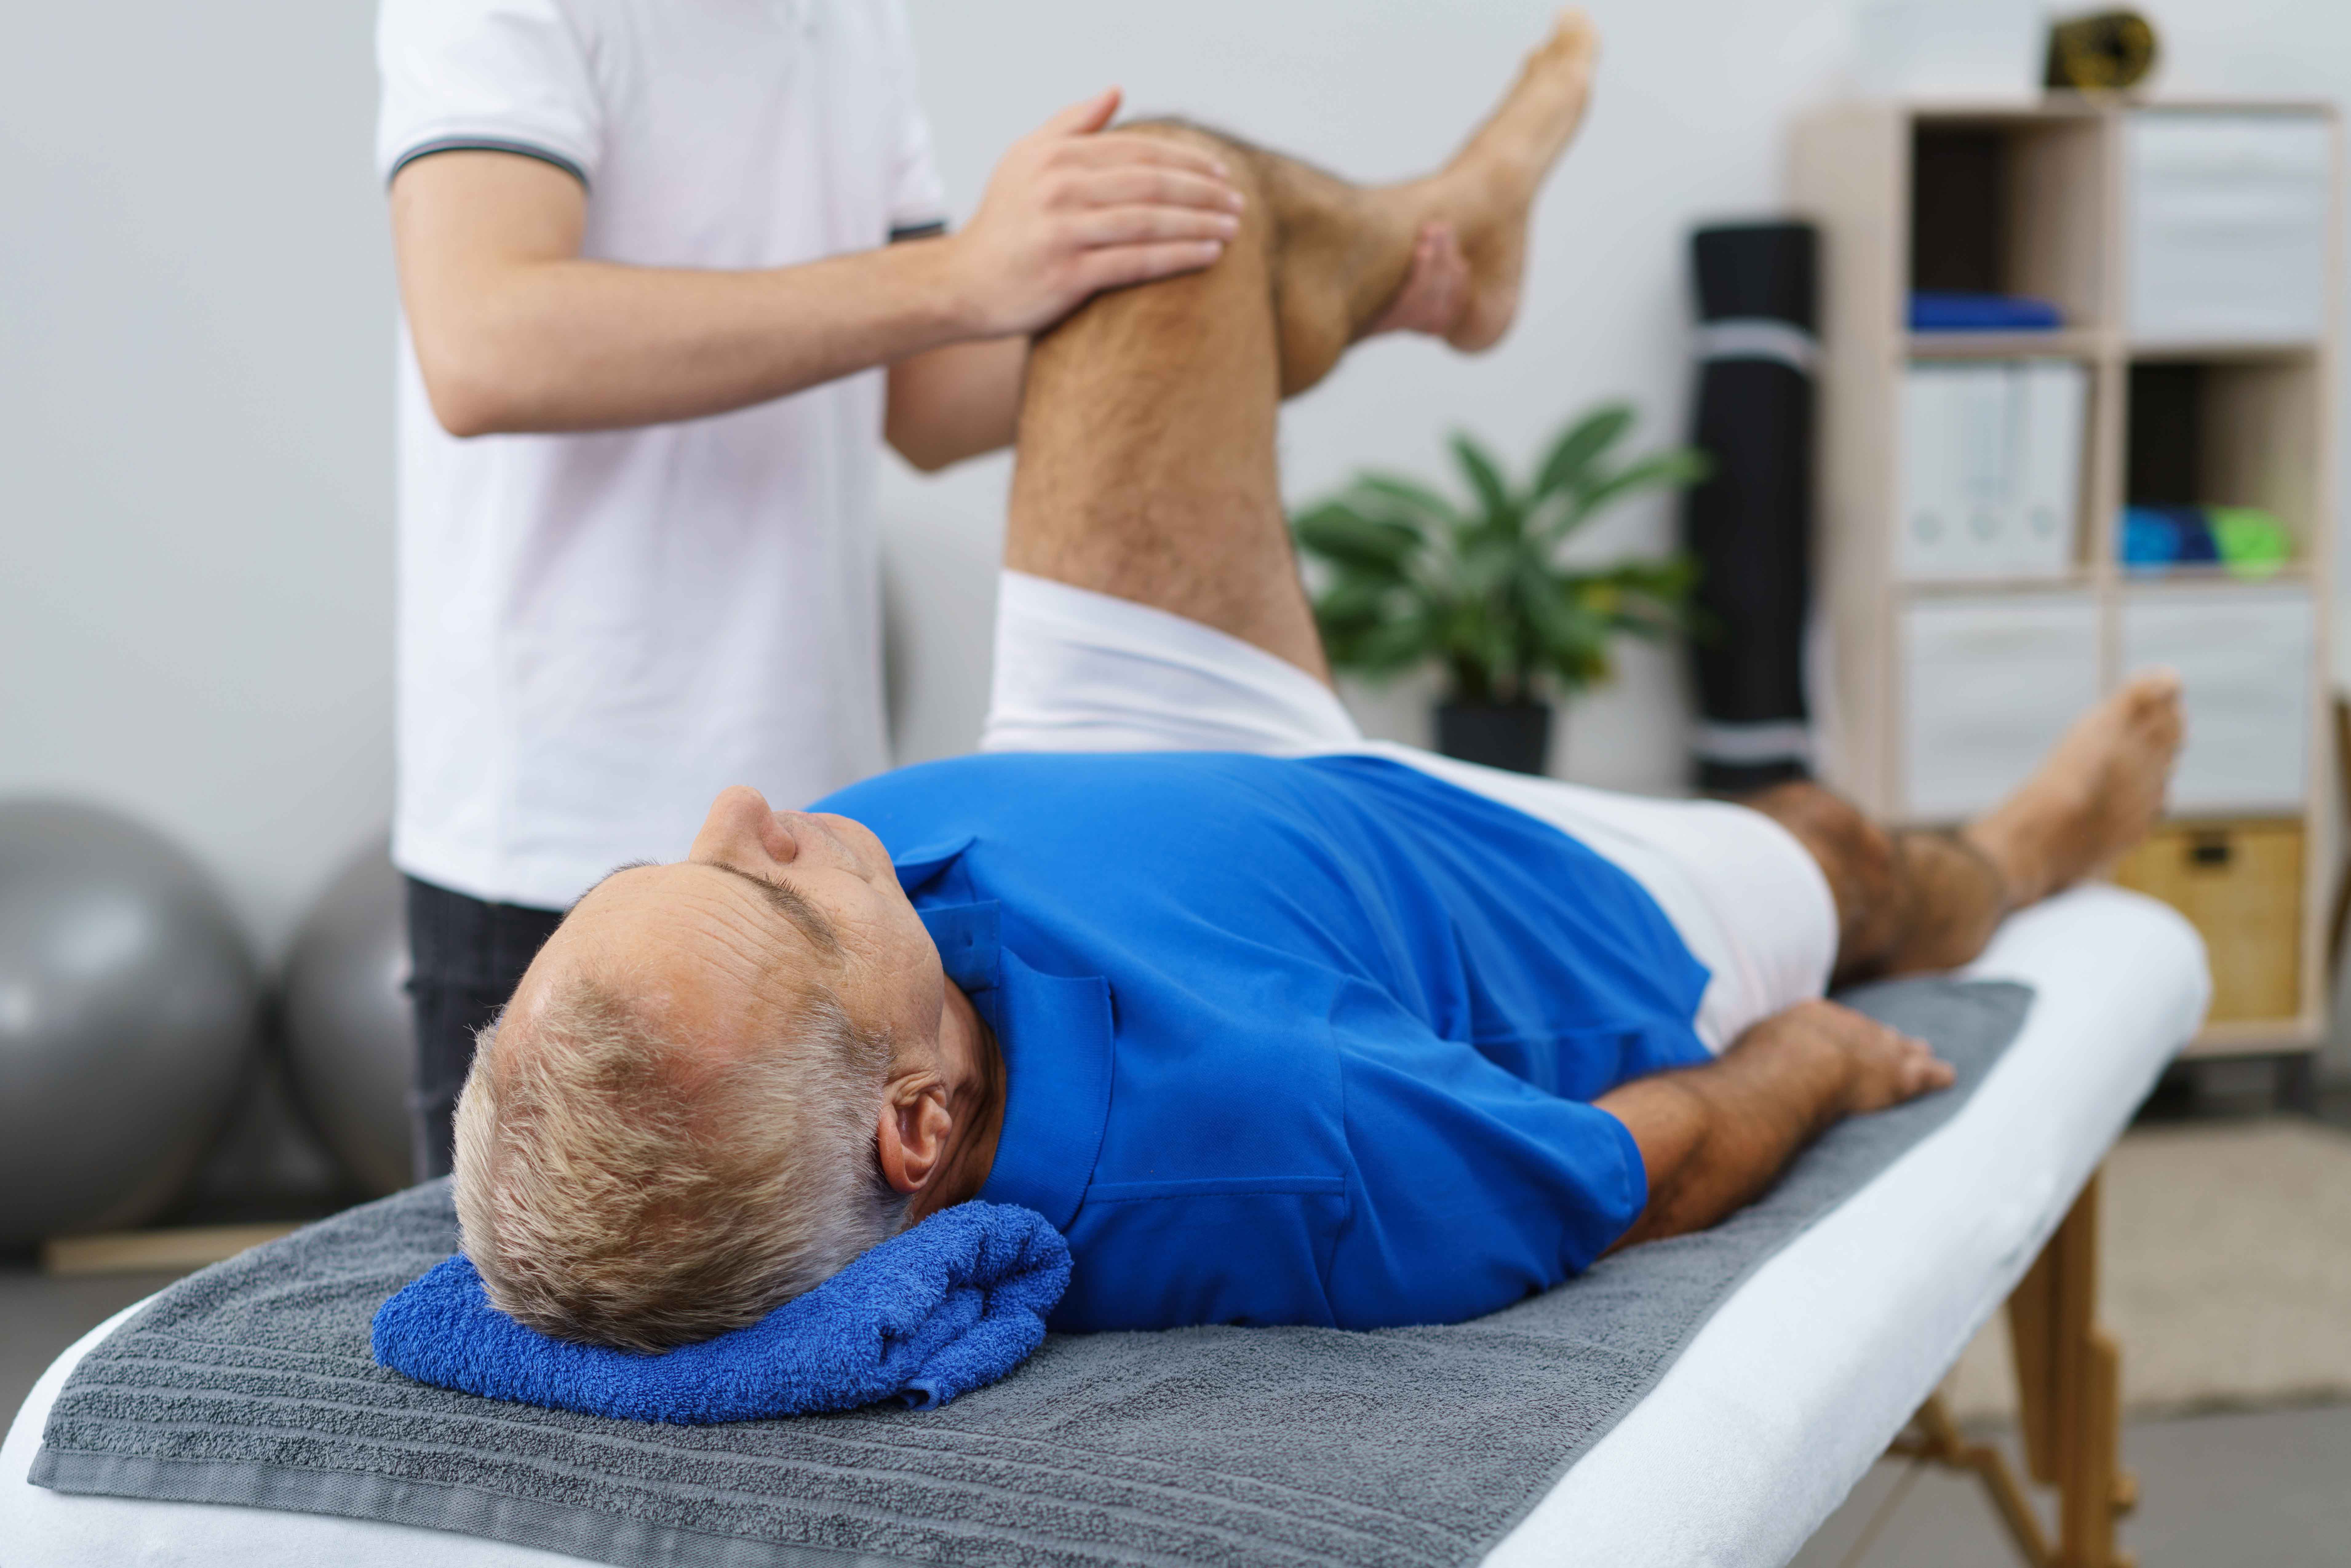 Caringbah Physiotherapy Practice